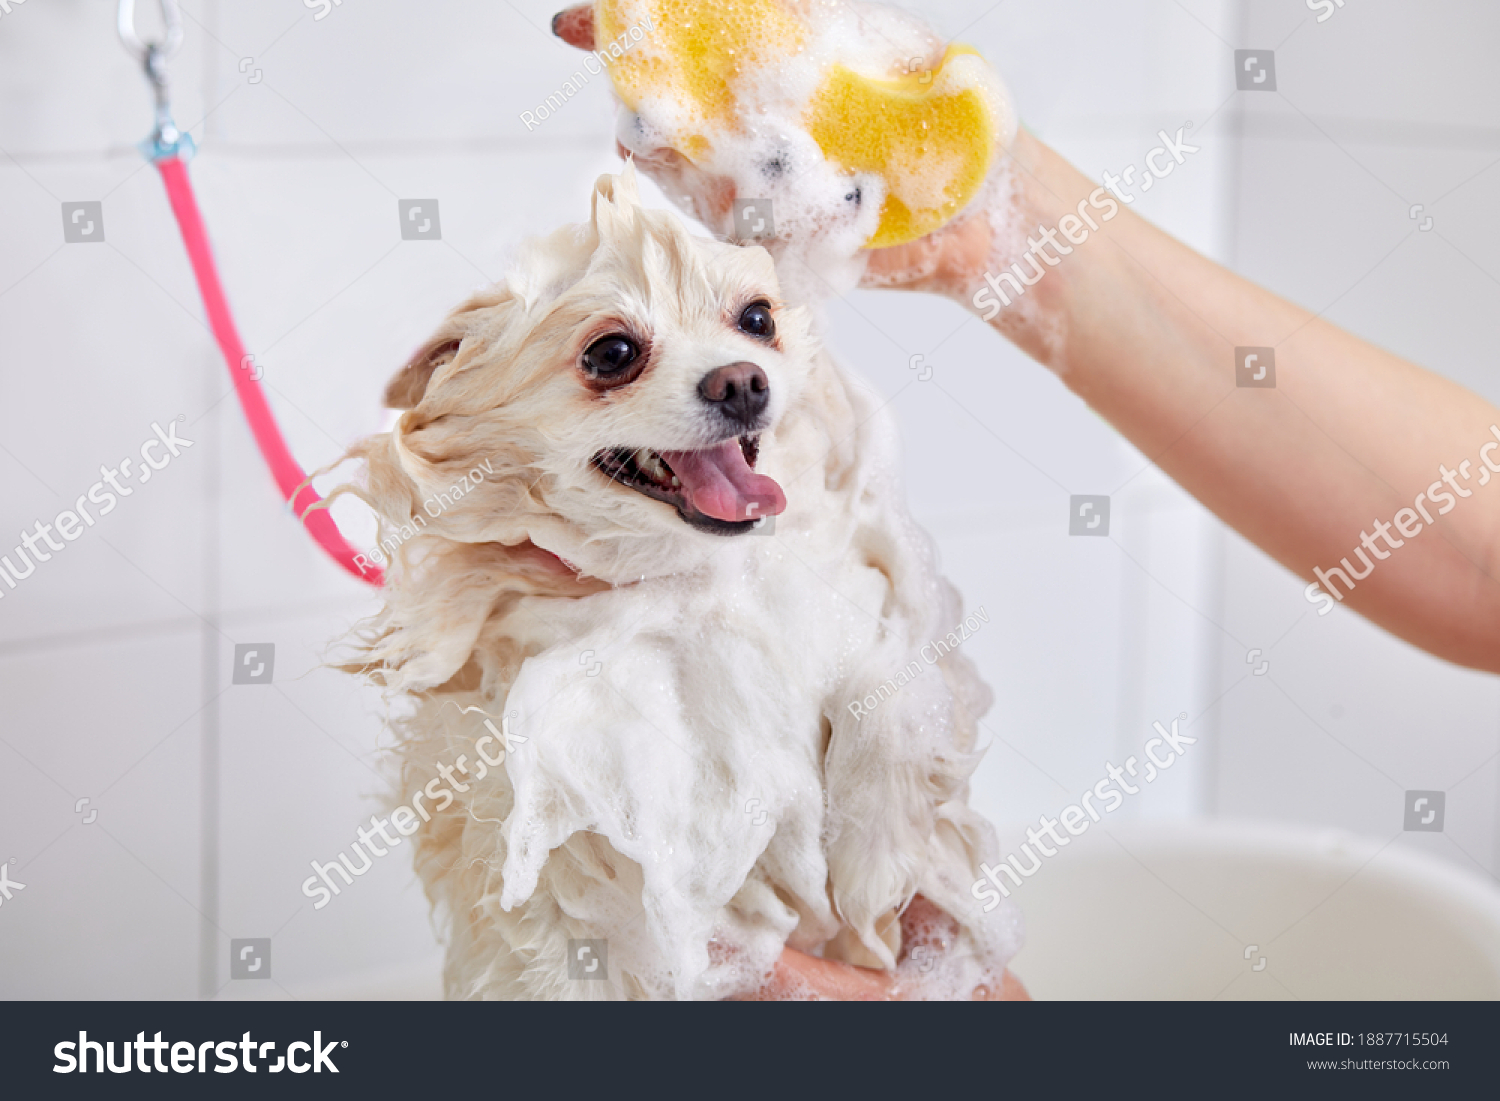 pomeranian spitz in bath before grooming, procedure of hair cutting by professional grooming master.little spitz dog get shower, dogs beauty concept #1887715504